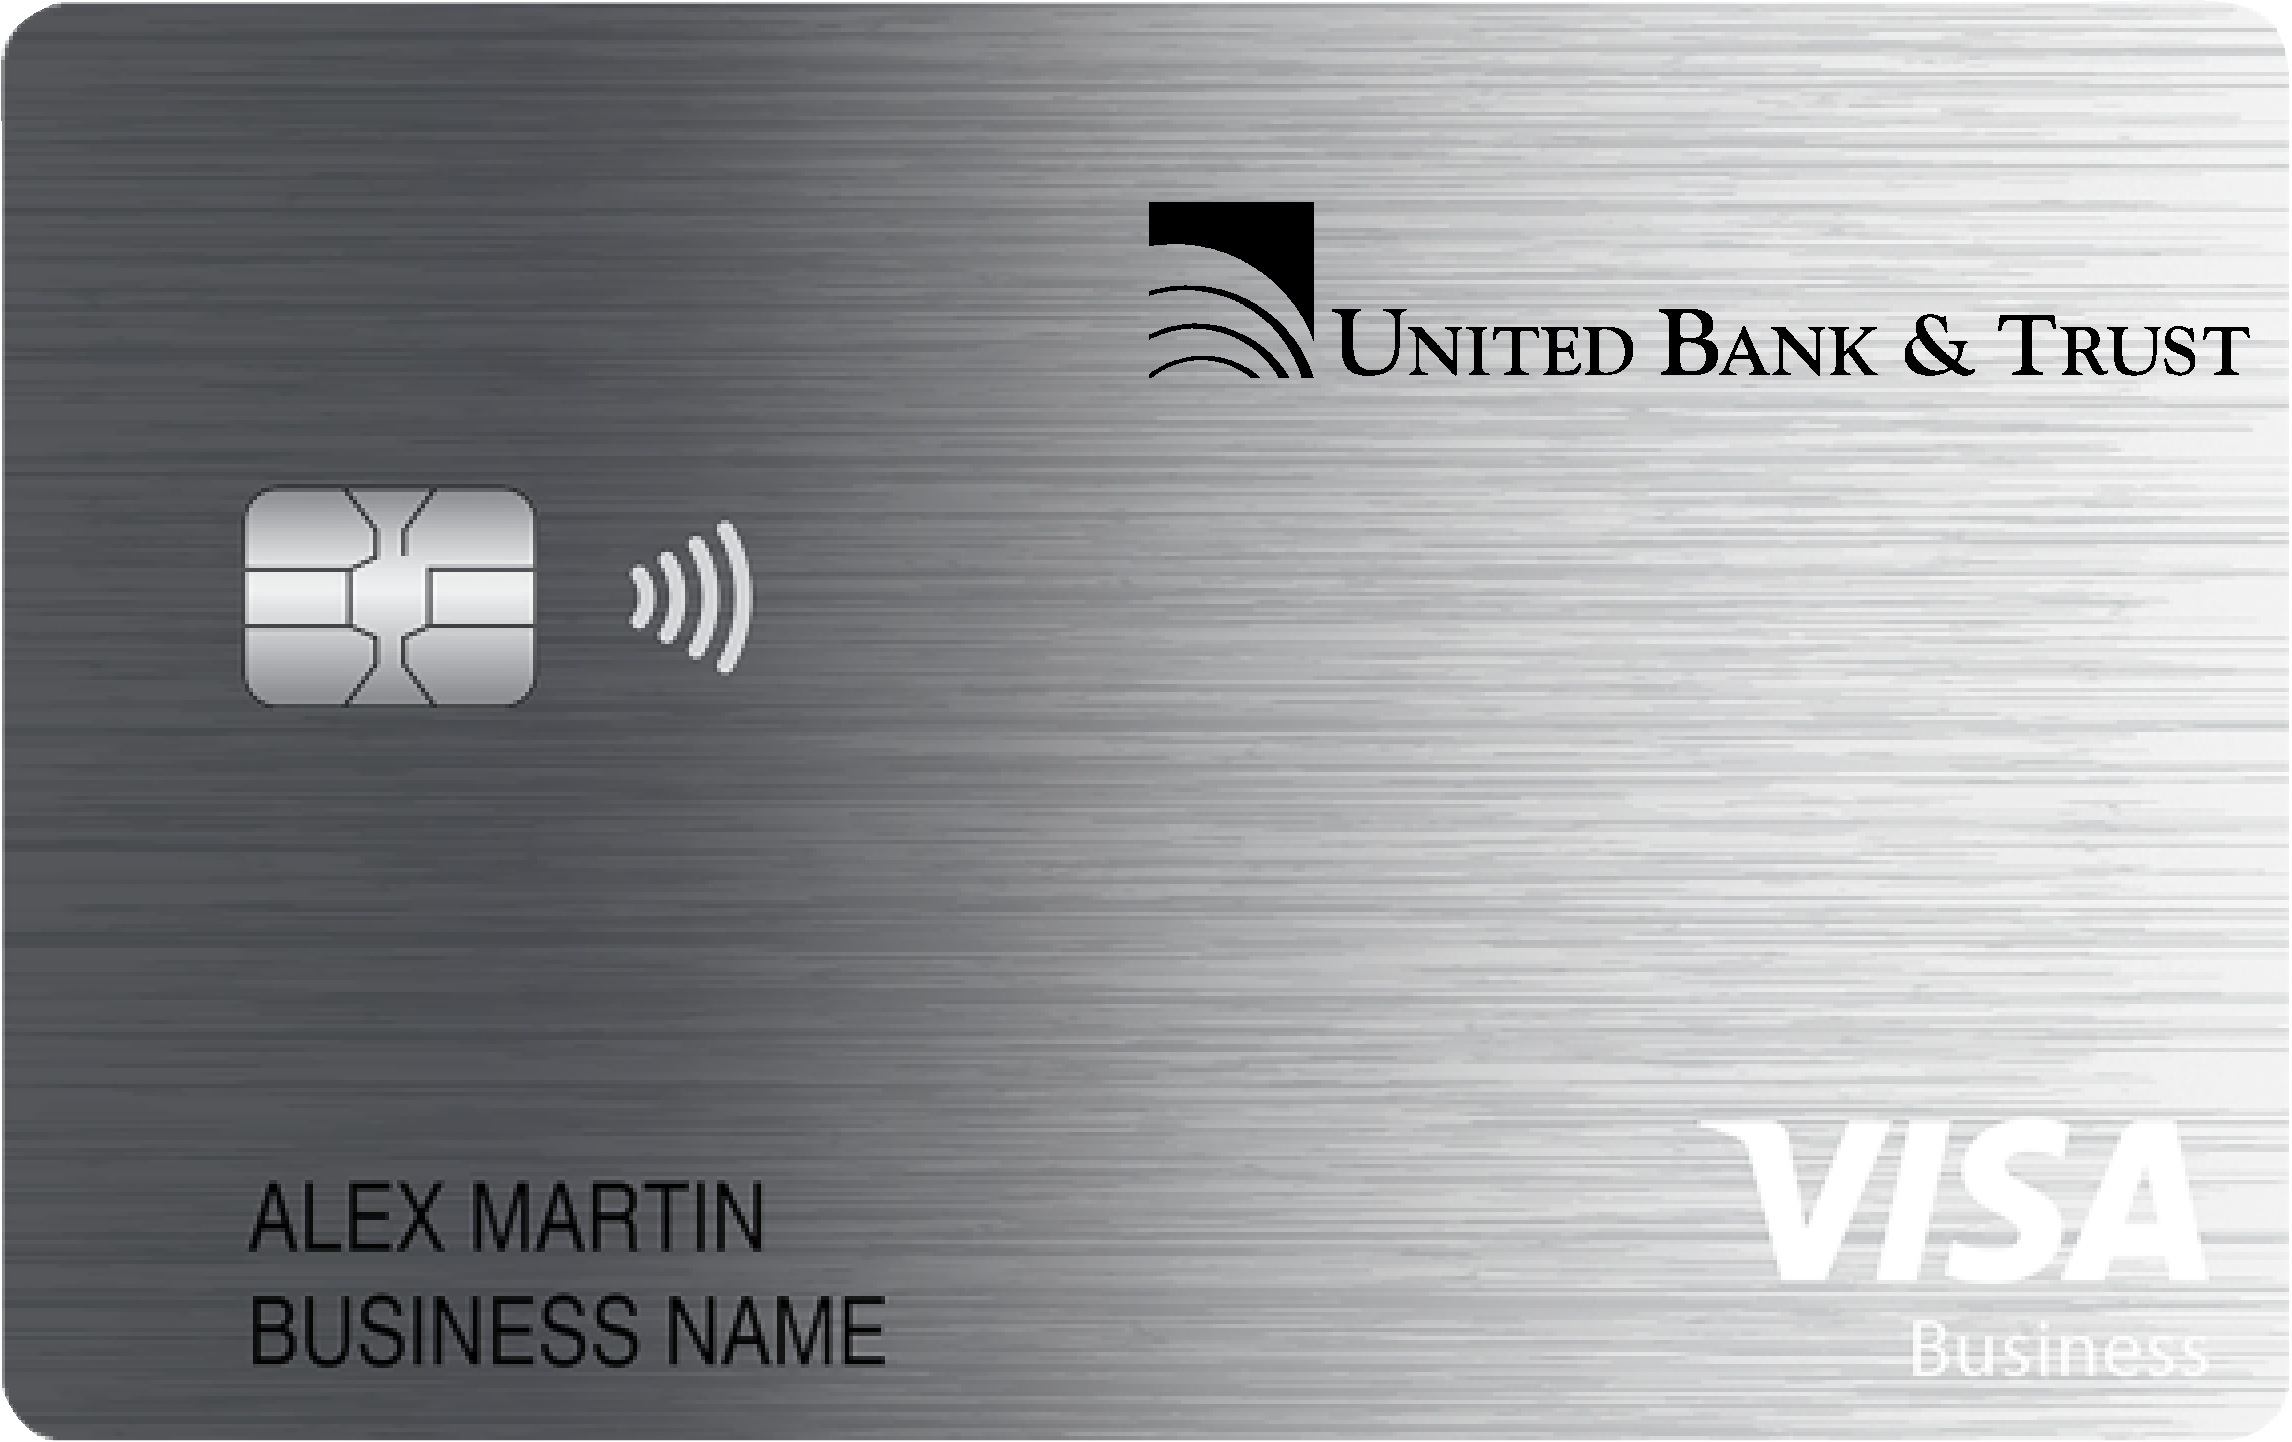 United Bank & Trust Business Real Rewards Card